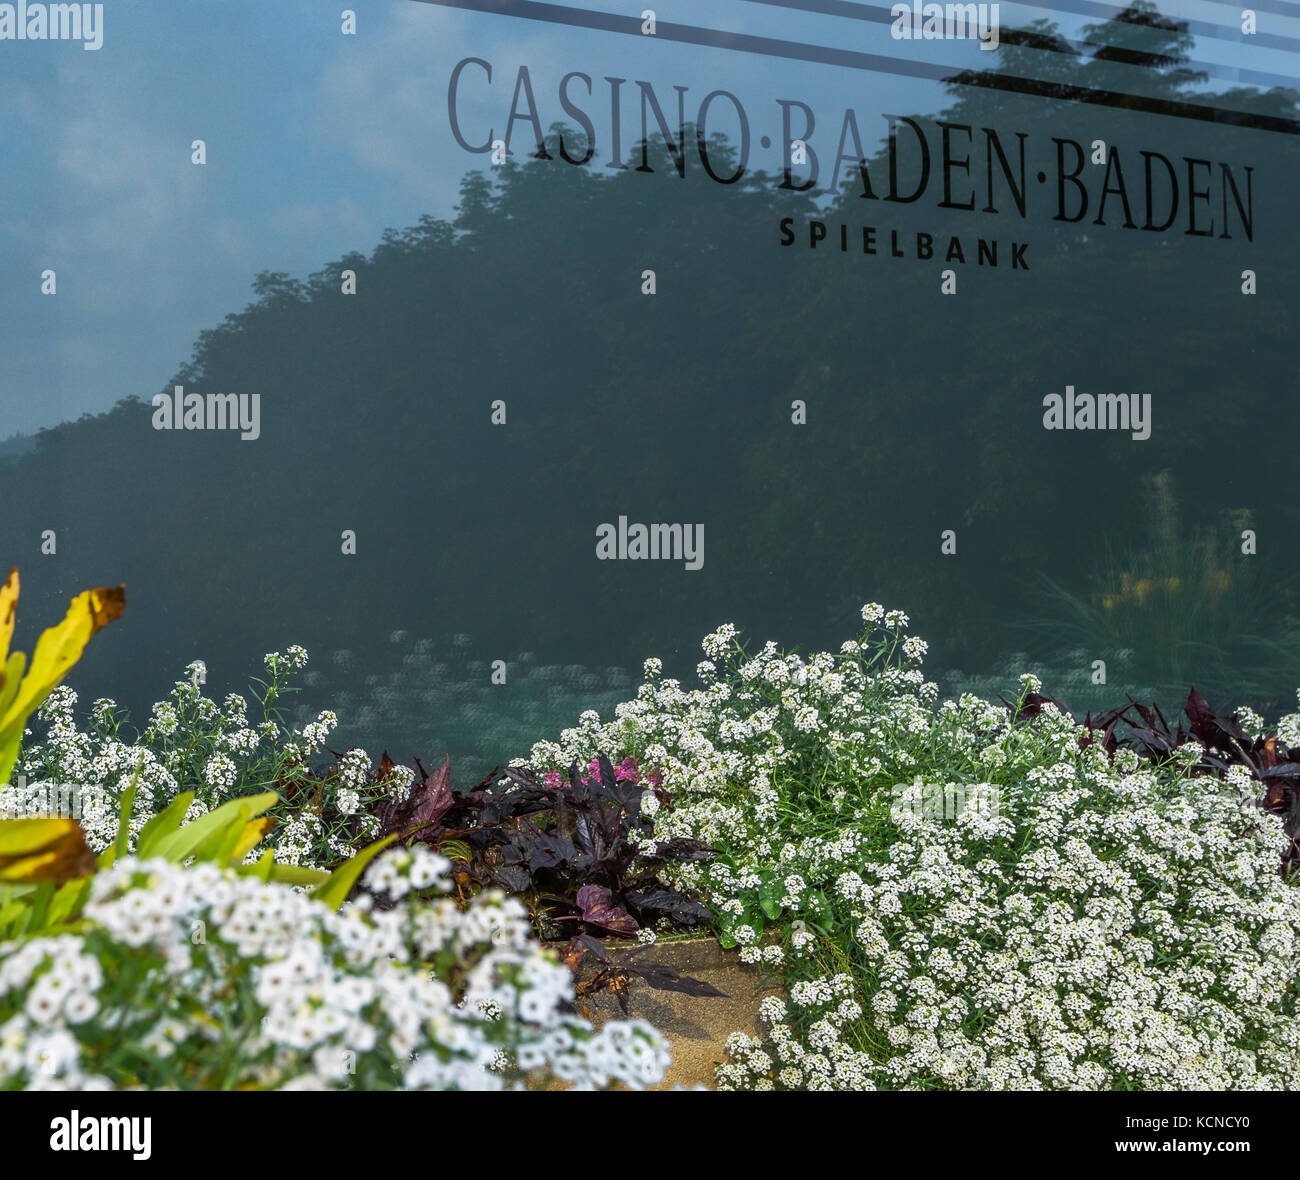 casino, spa town Baden-Baden, Baden-Wuerttemberg, outskirts of Black Forest, Germany Stock Photo